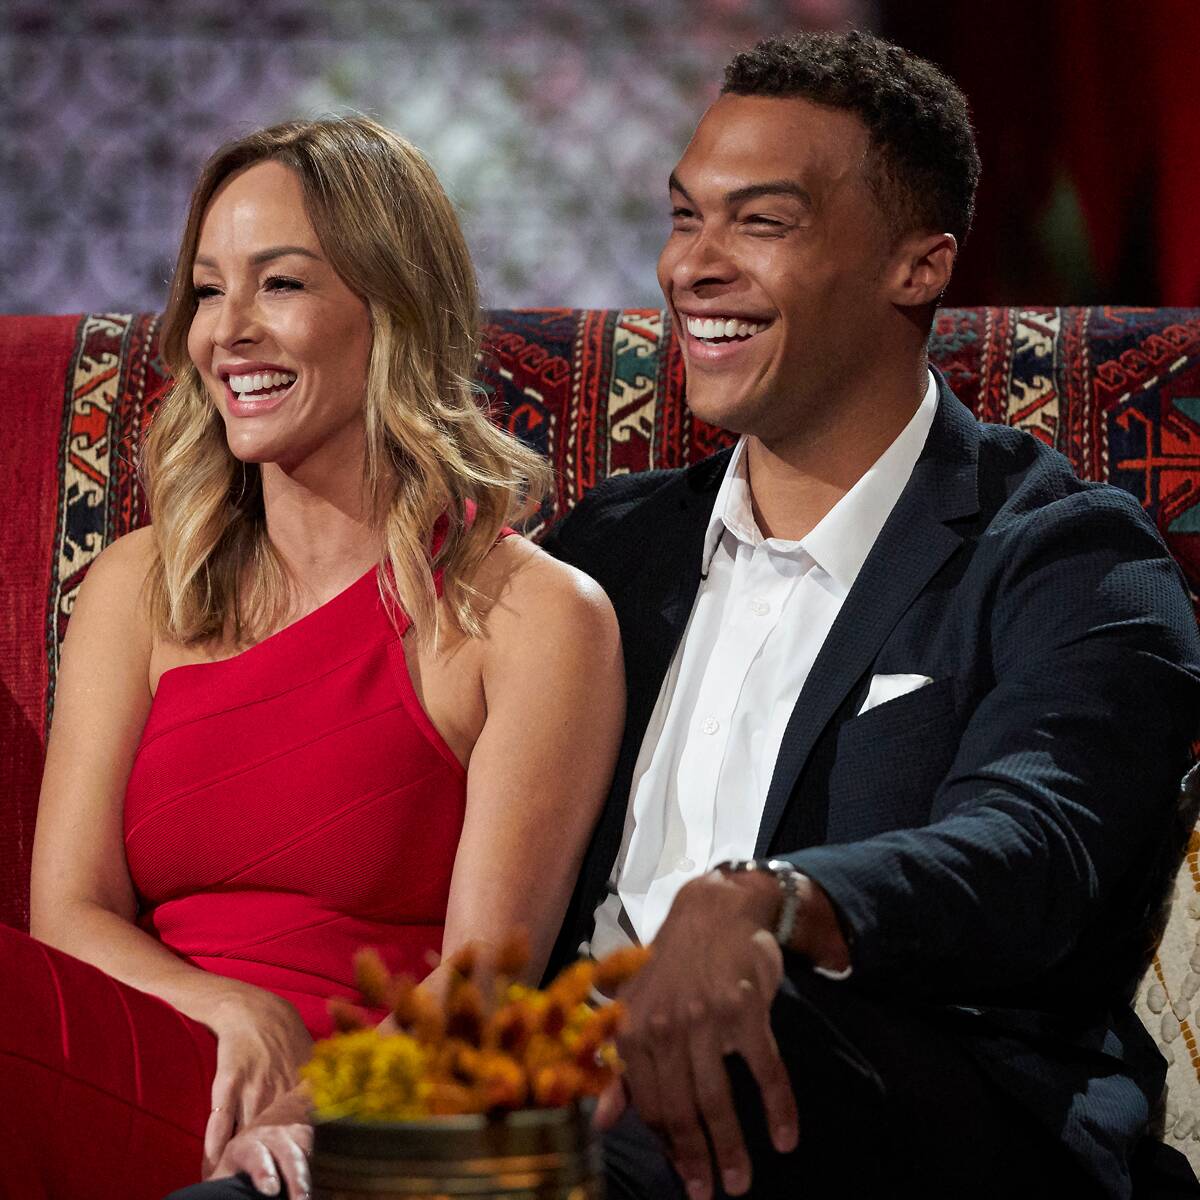 Dale Moss' Mystery Woman Revealed Following Accusations He Cheated on Bachelorette Clare Crawley